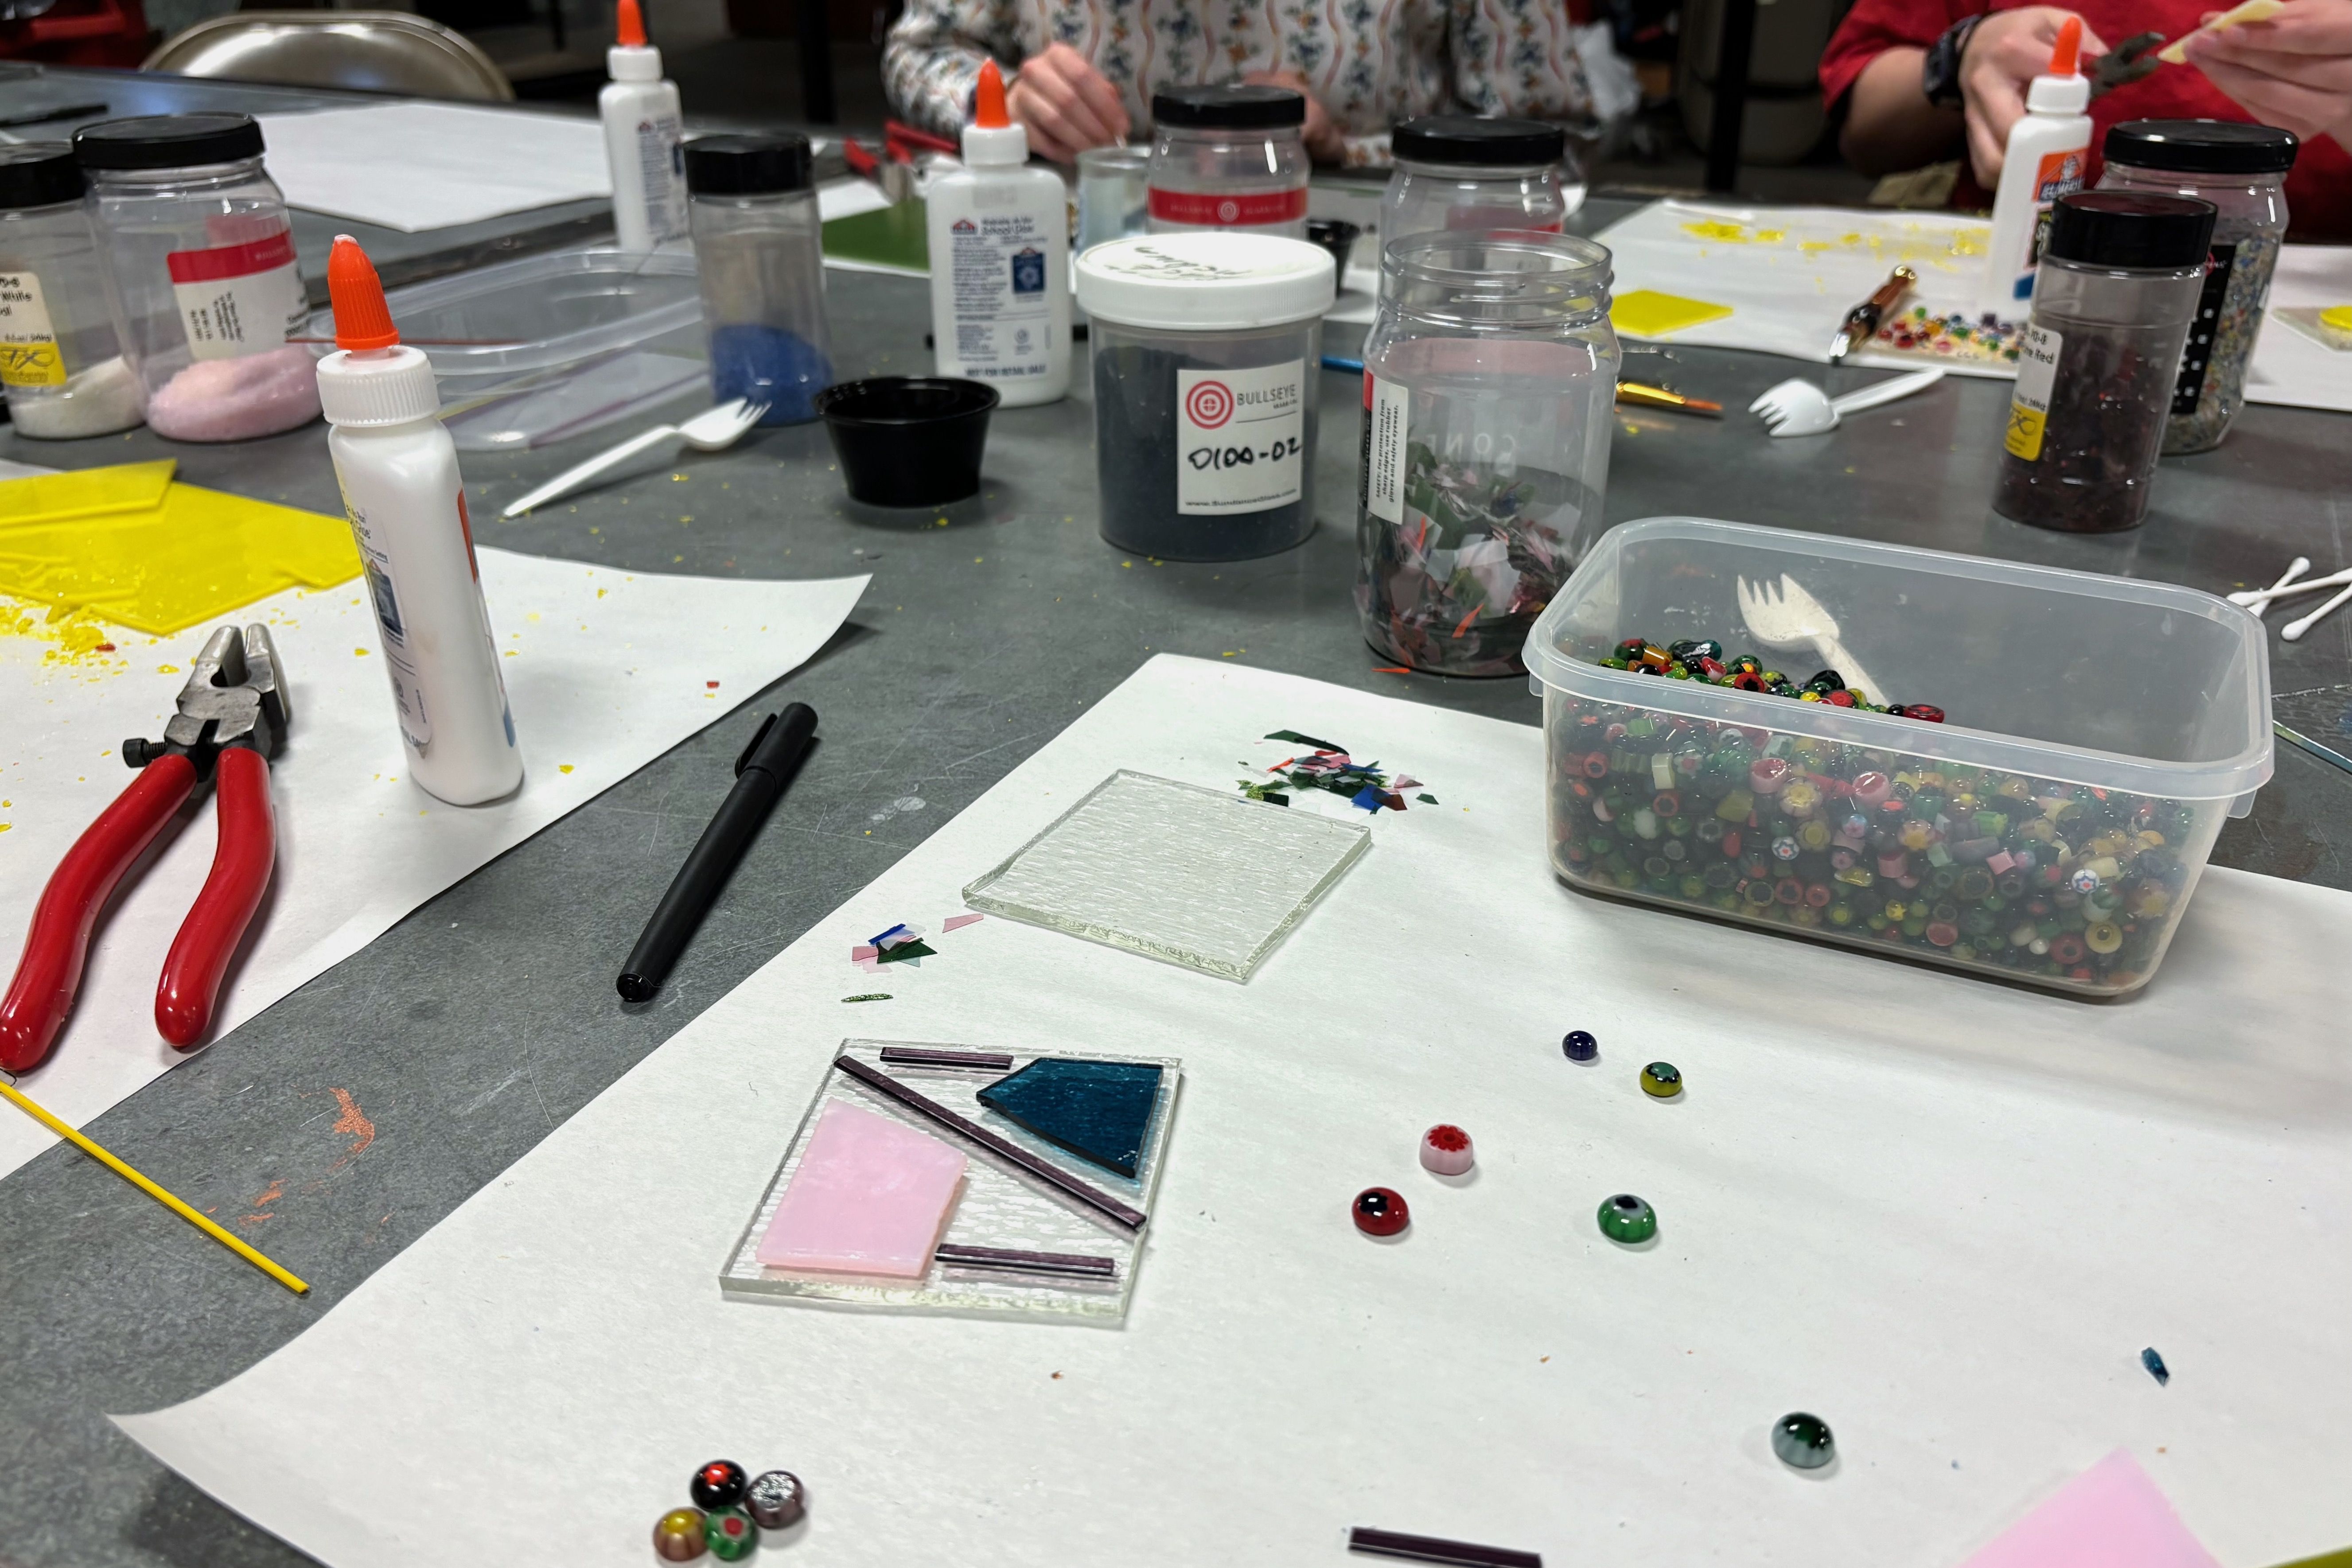 A tabletop full of mosaic-making supplies like beads, glass shards, glue and pliers